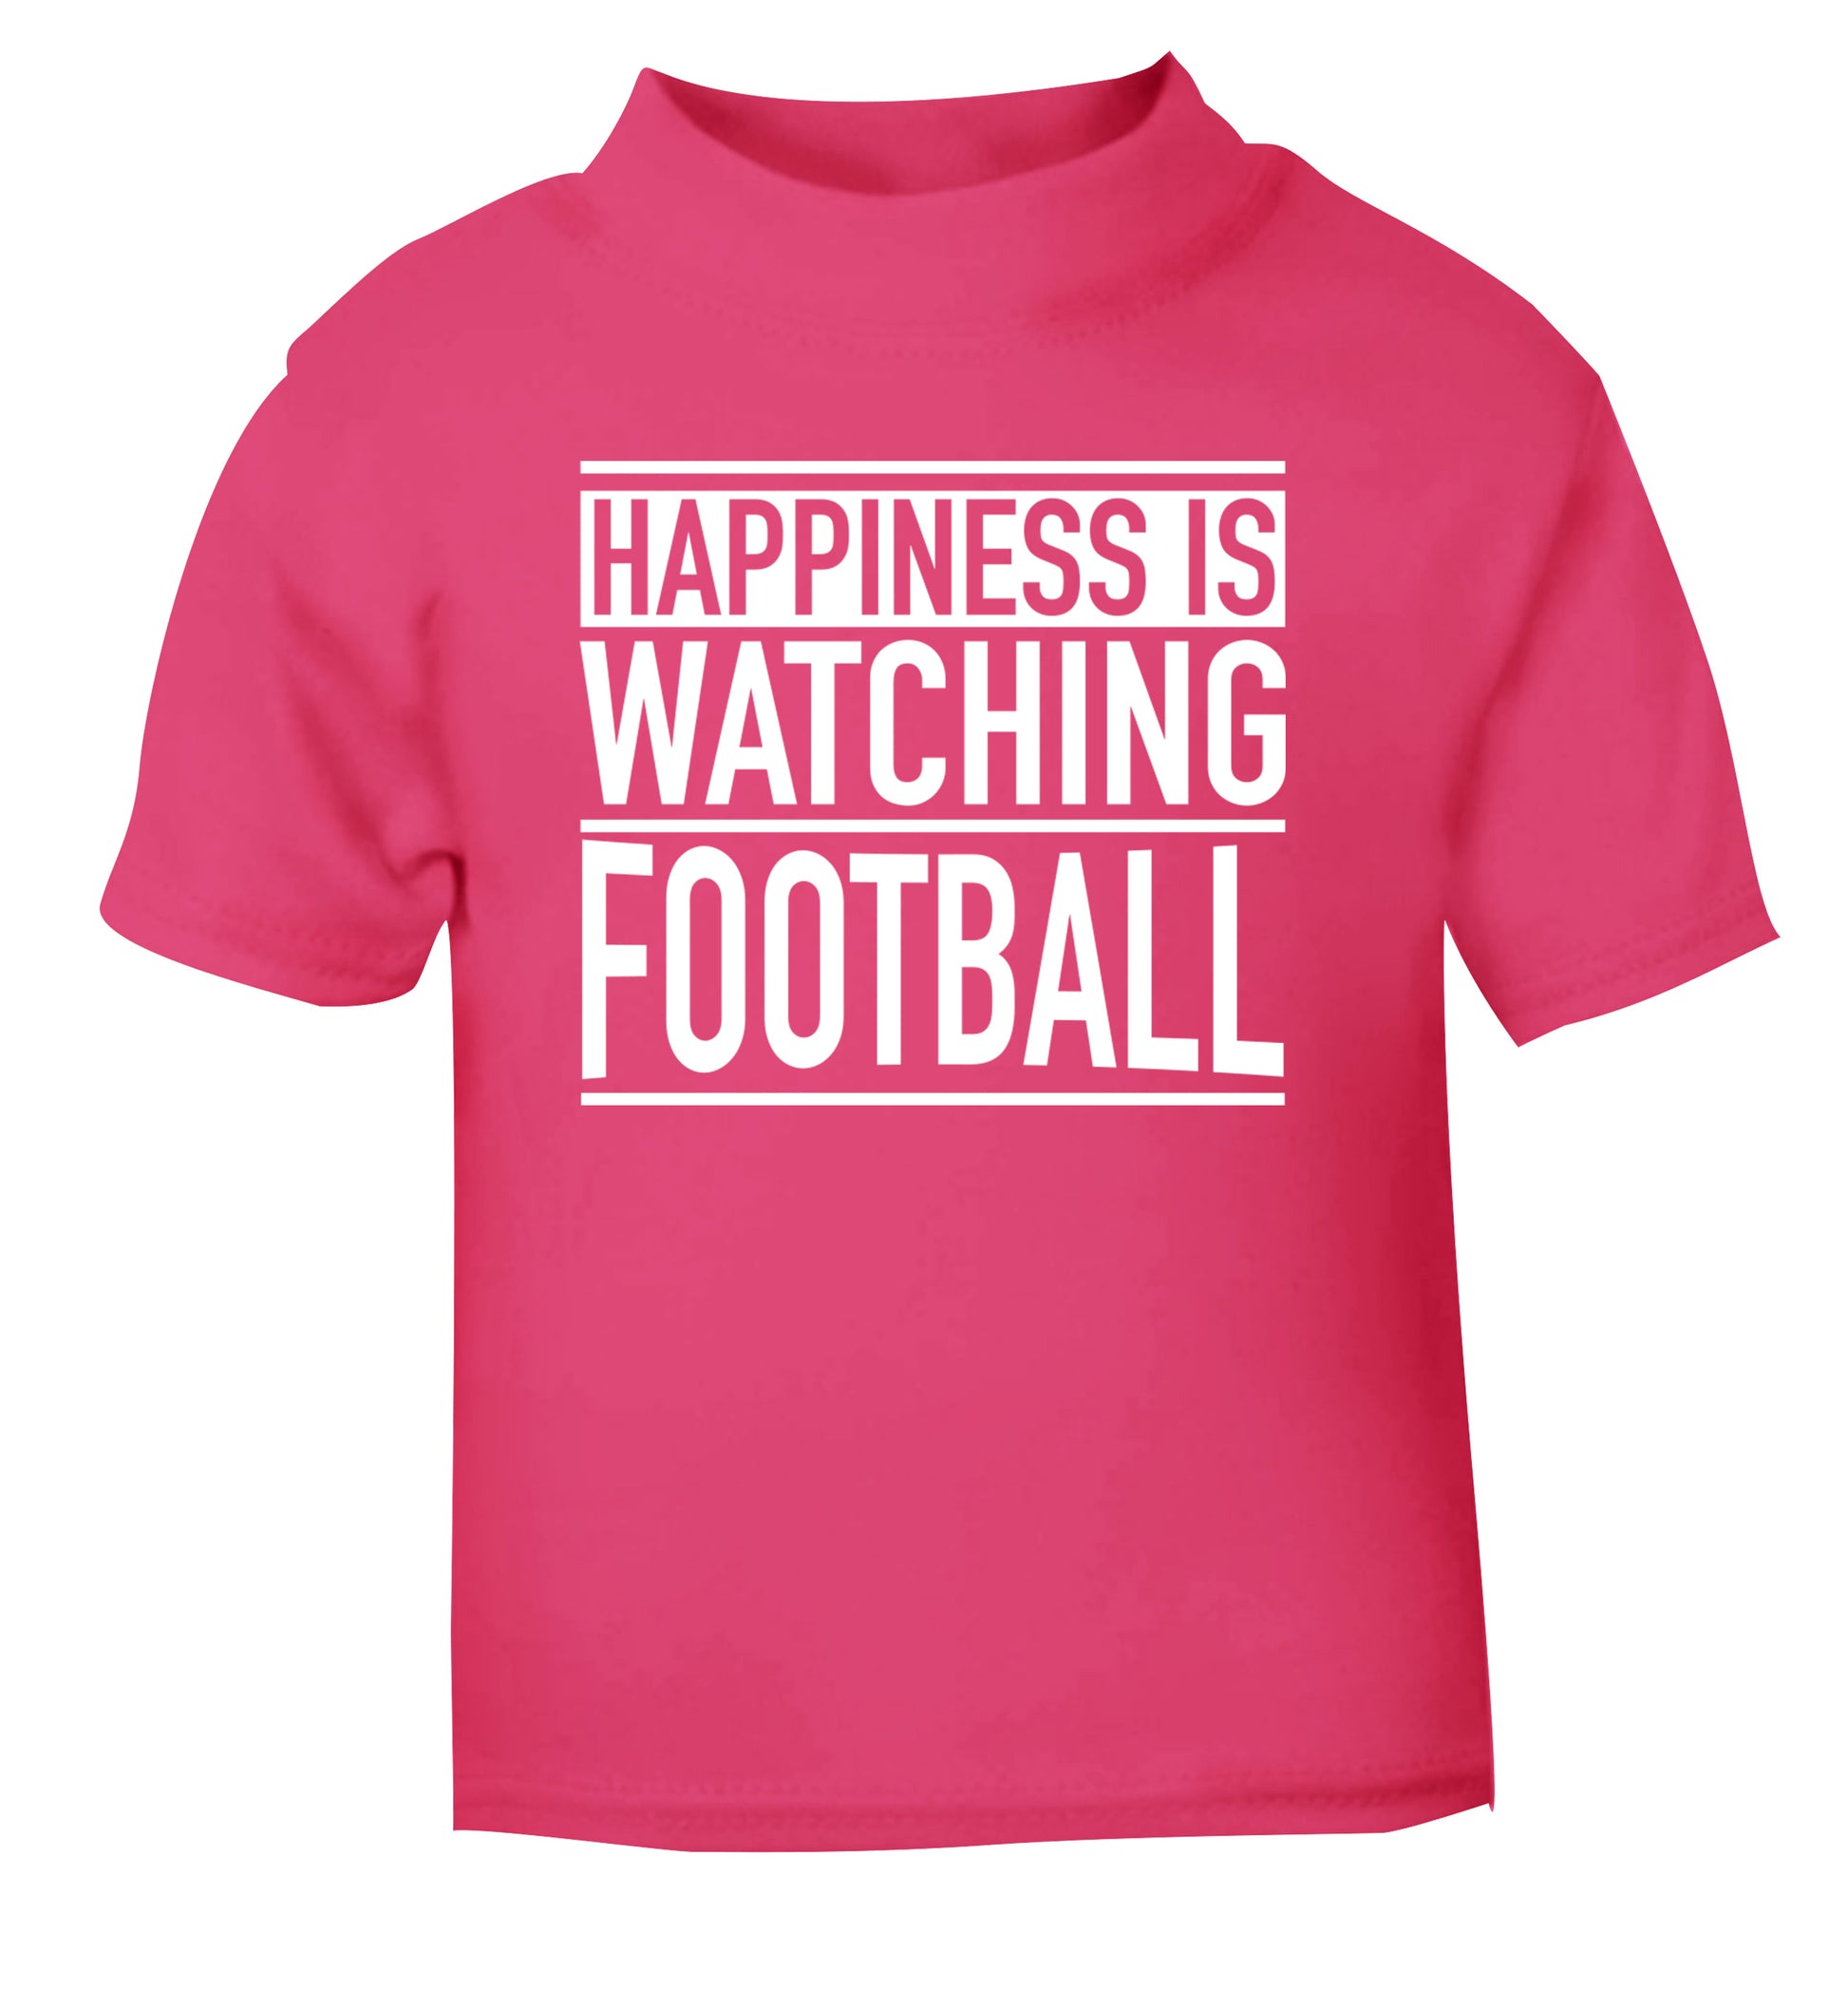 Happiness is watching football pink Baby Toddler Tshirt 2 Years